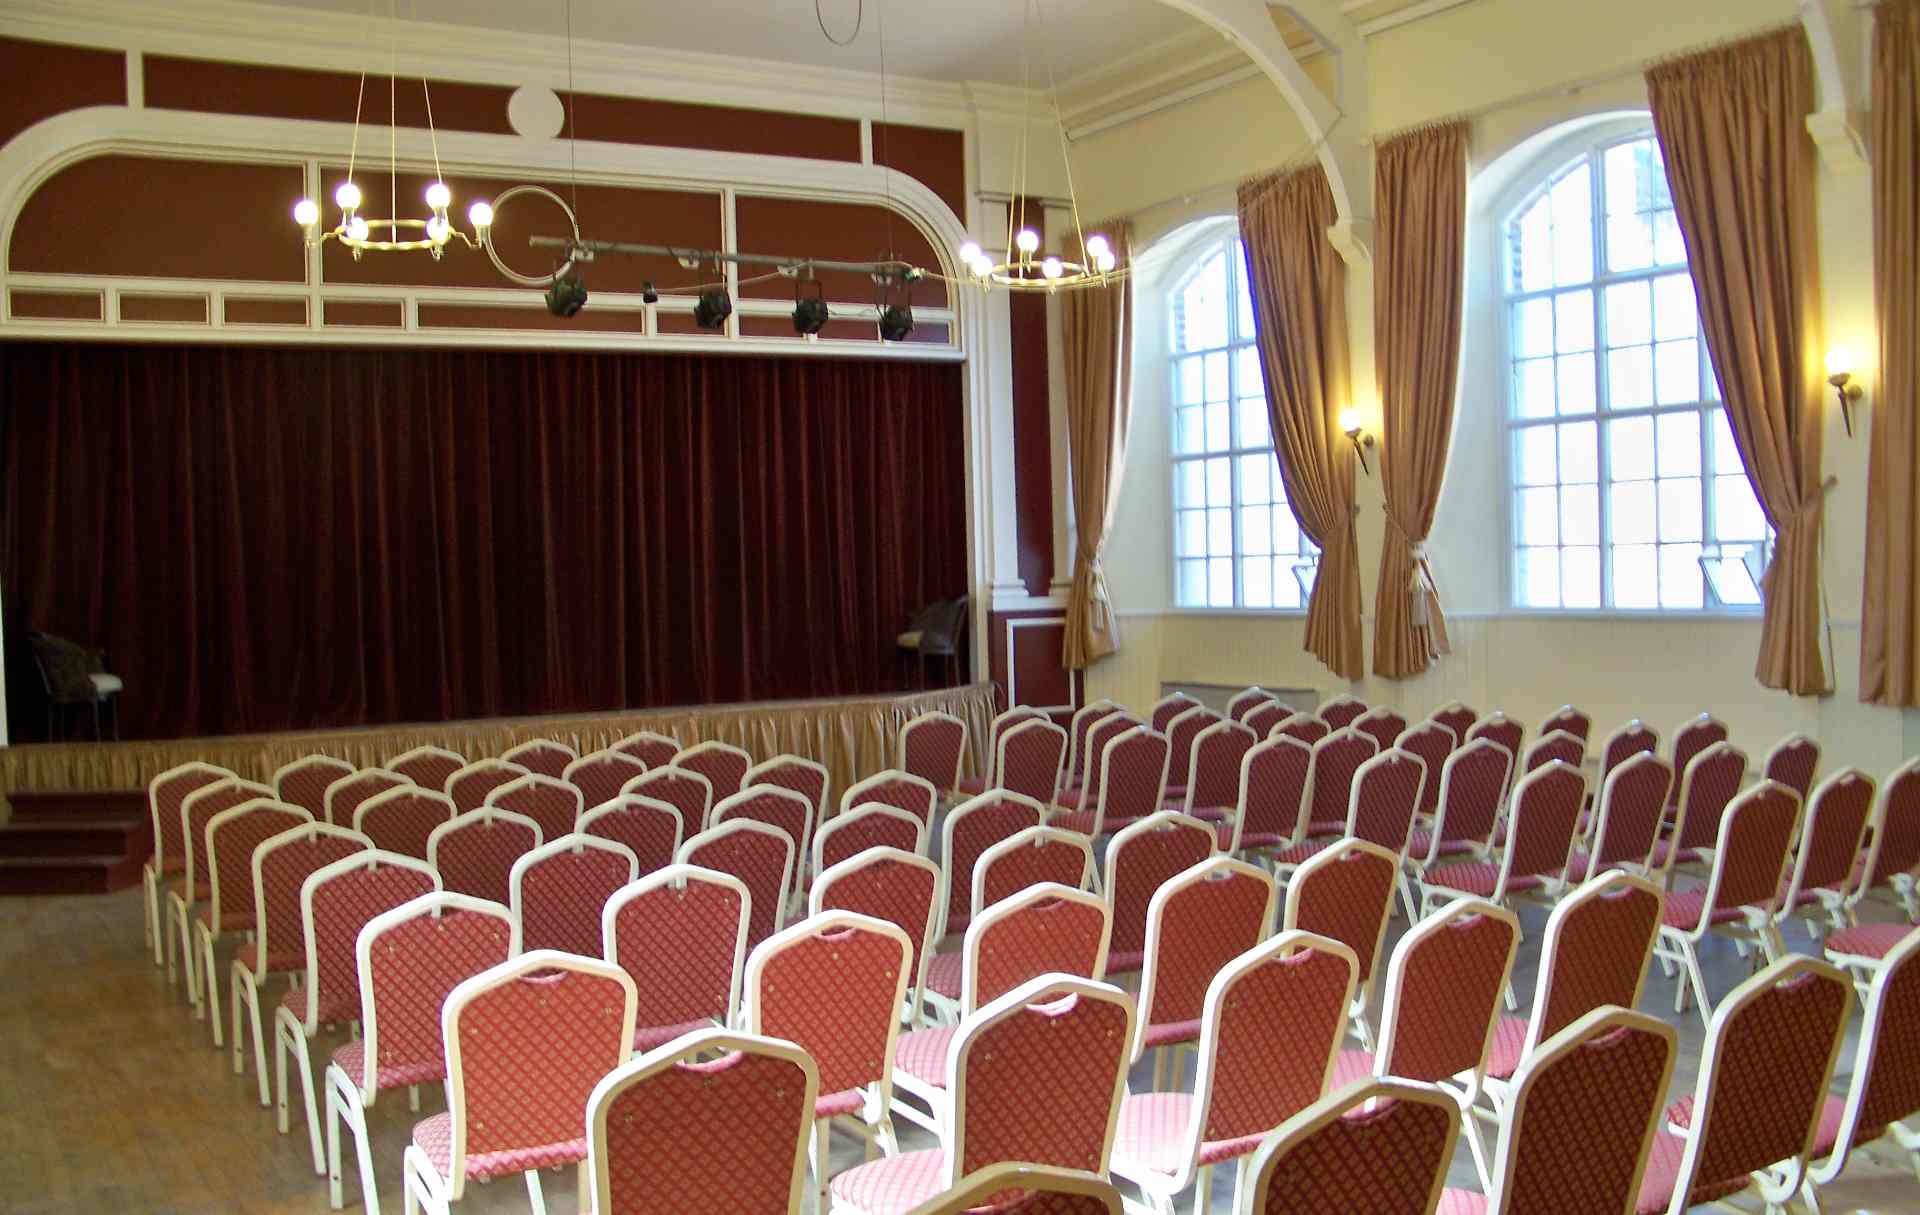 The Assembly Room Theatre today